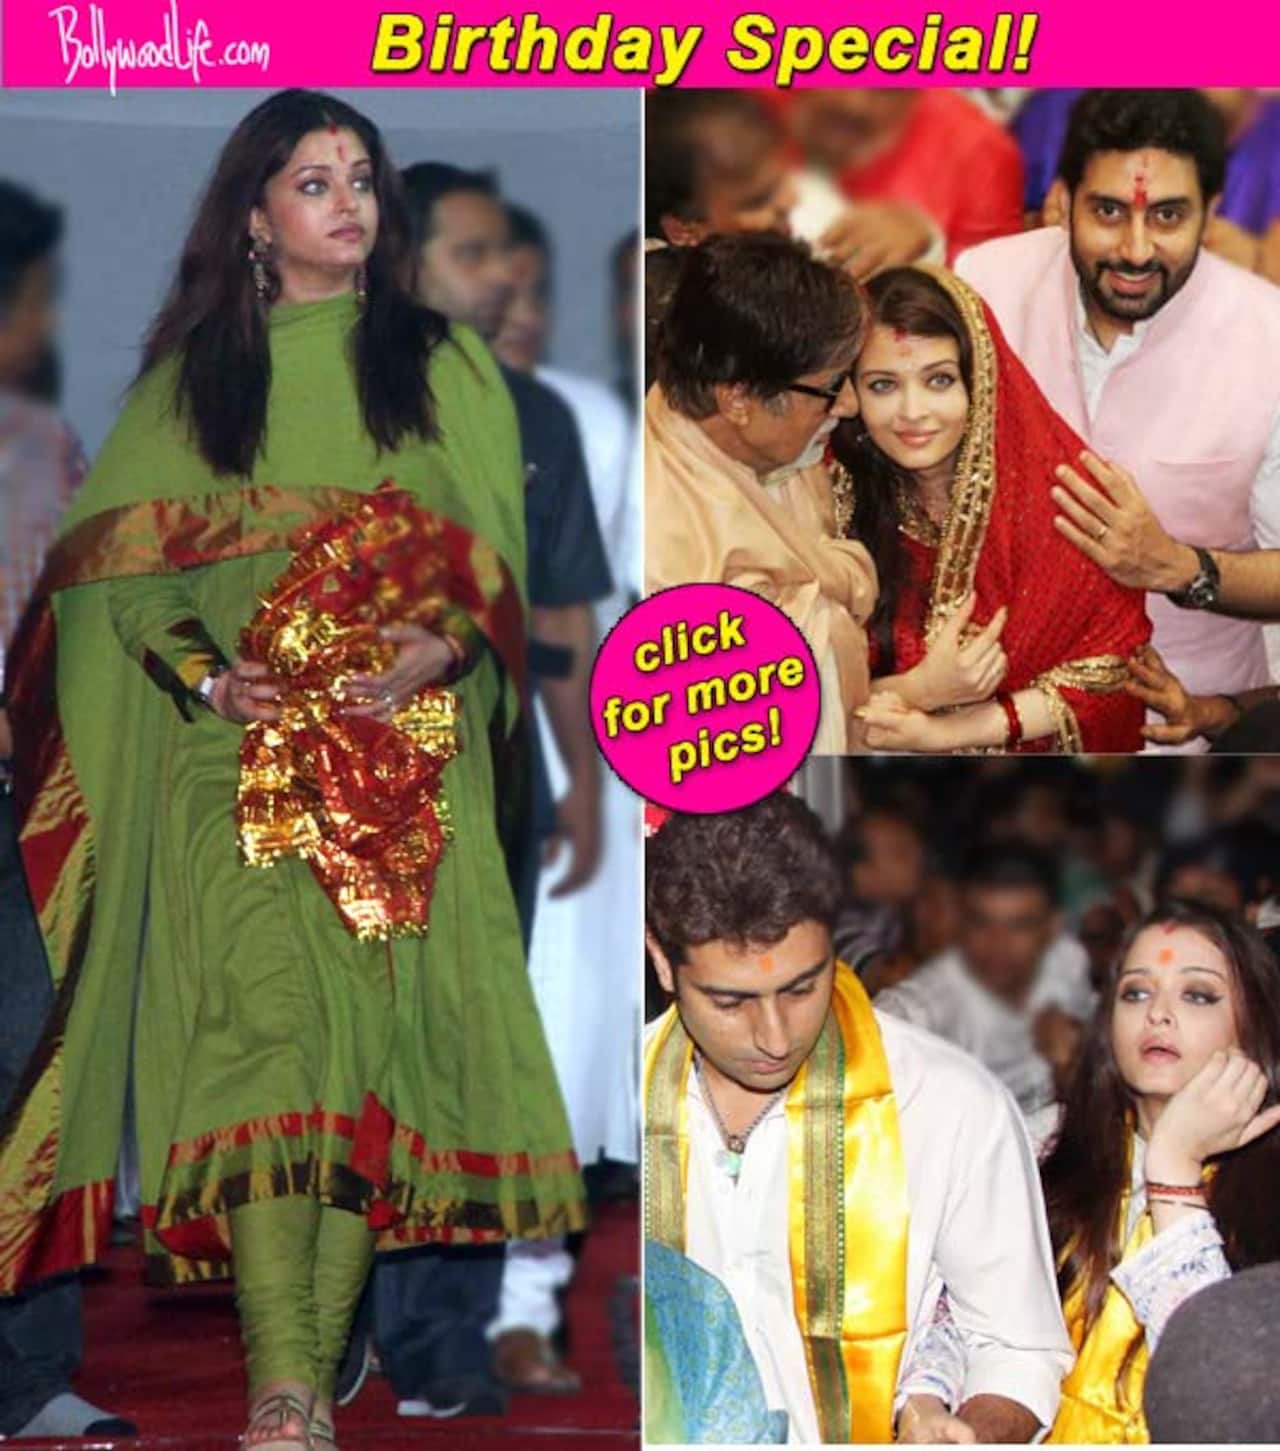 Aishwarya Rai Hd Xxxreal Video - Aishwarya Rai Bachchan and her special connection with spirituality- View  pics! - Bollywood News & Gossip, Movie Reviews, Trailers & Videos at  Bollywoodlife.com